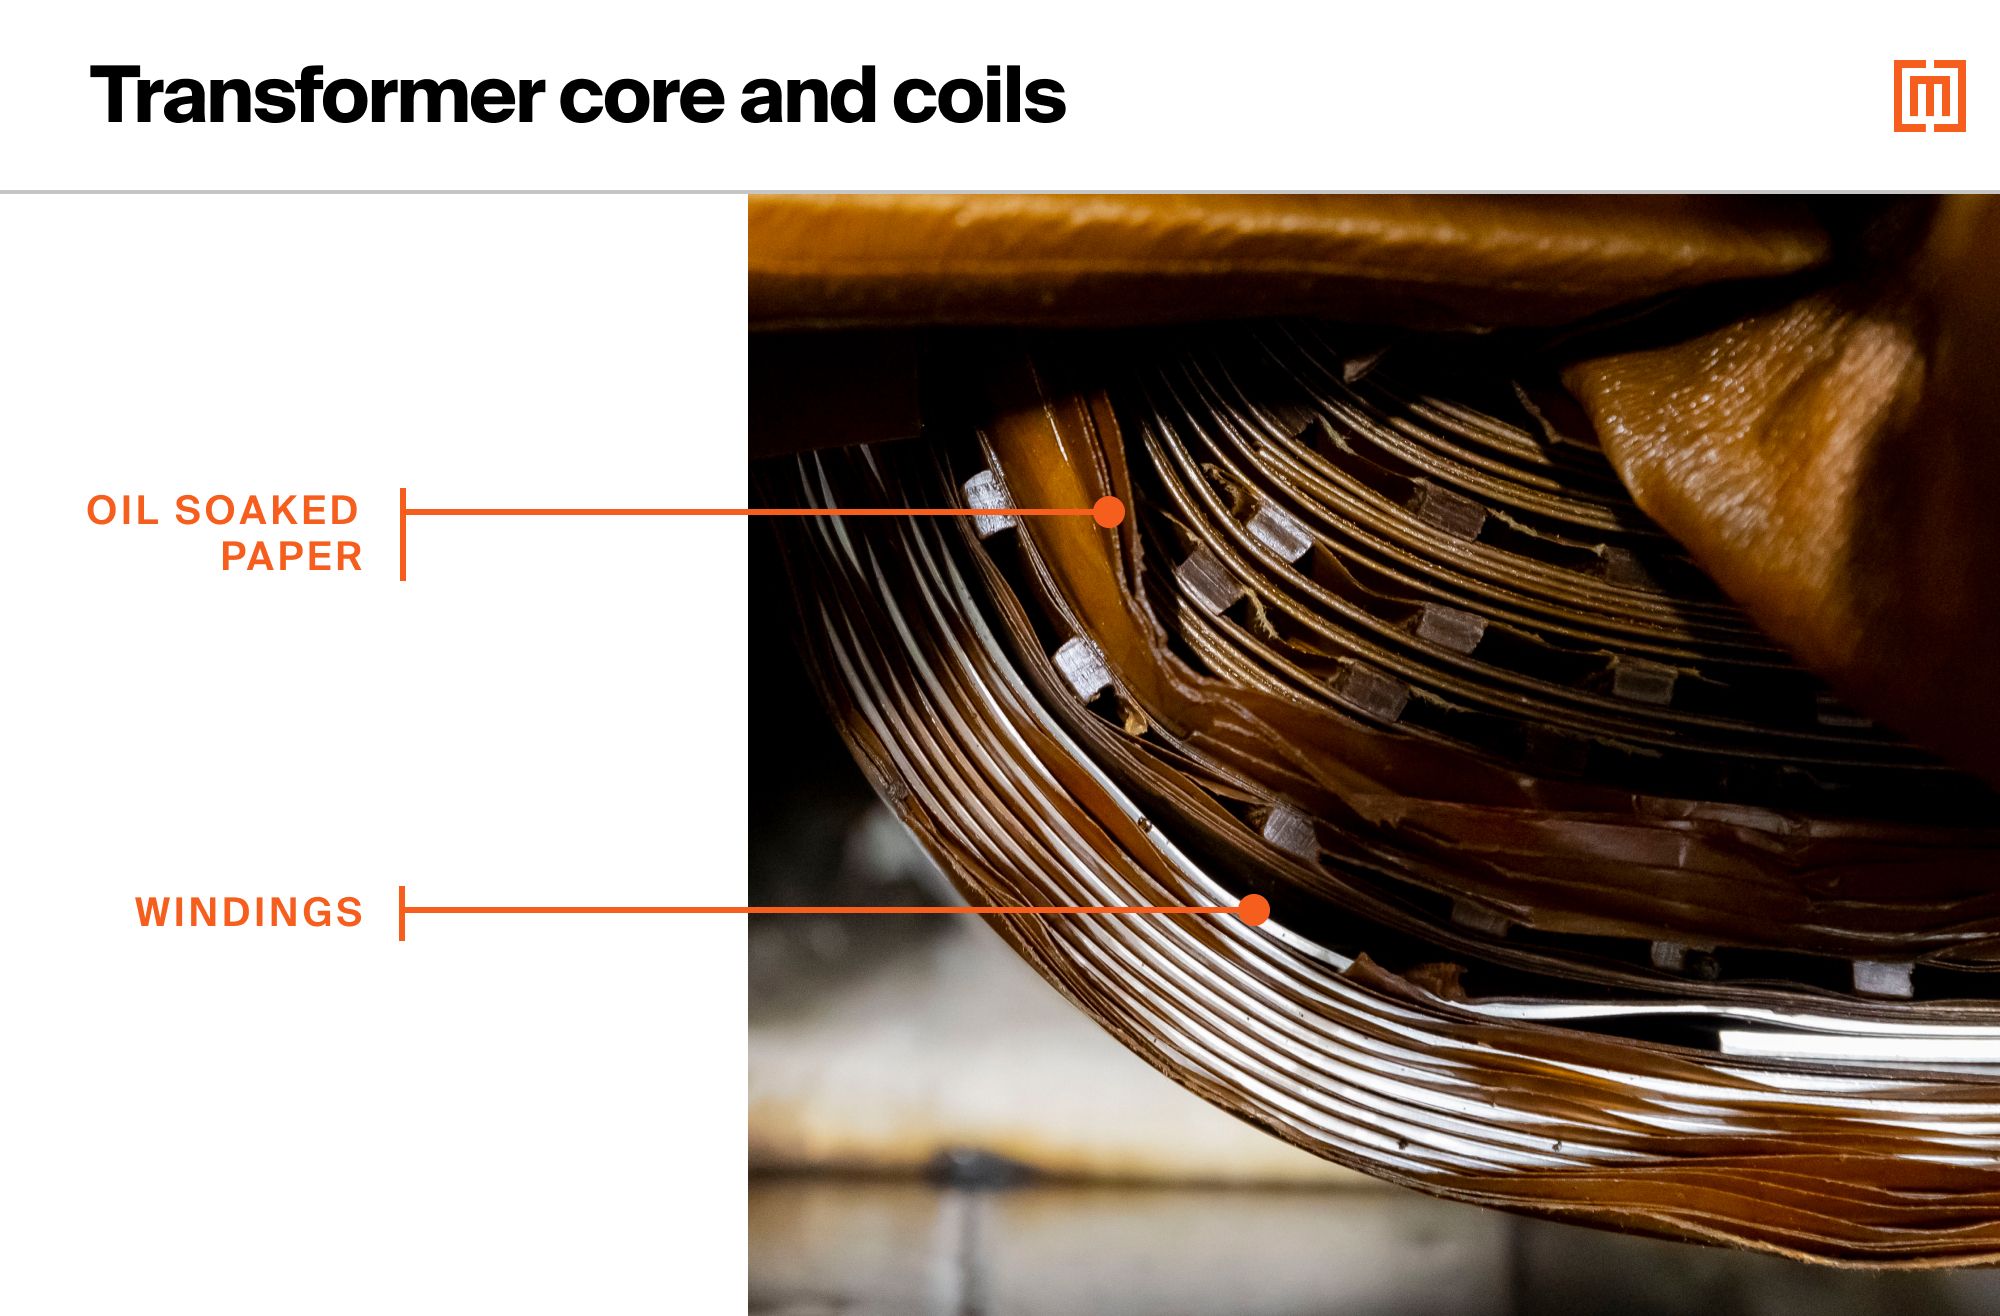 Transformer core and coils with oil soaked paper and windings